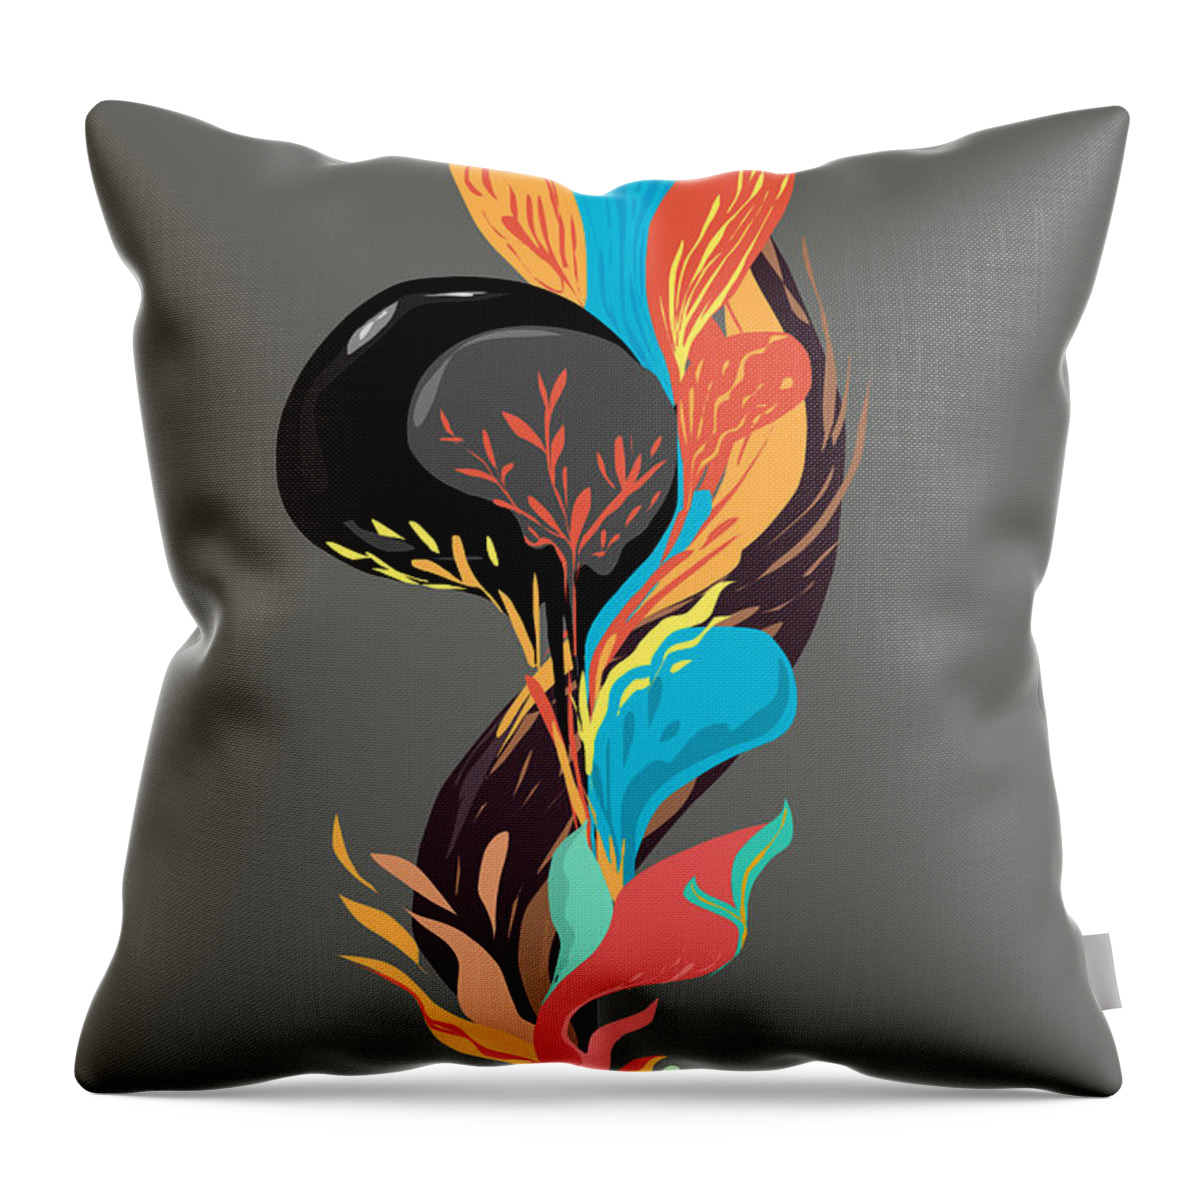 Abstract Throw Pillow featuring the digital art Imaginary Plants No.2 by Noppadol Sankankaew